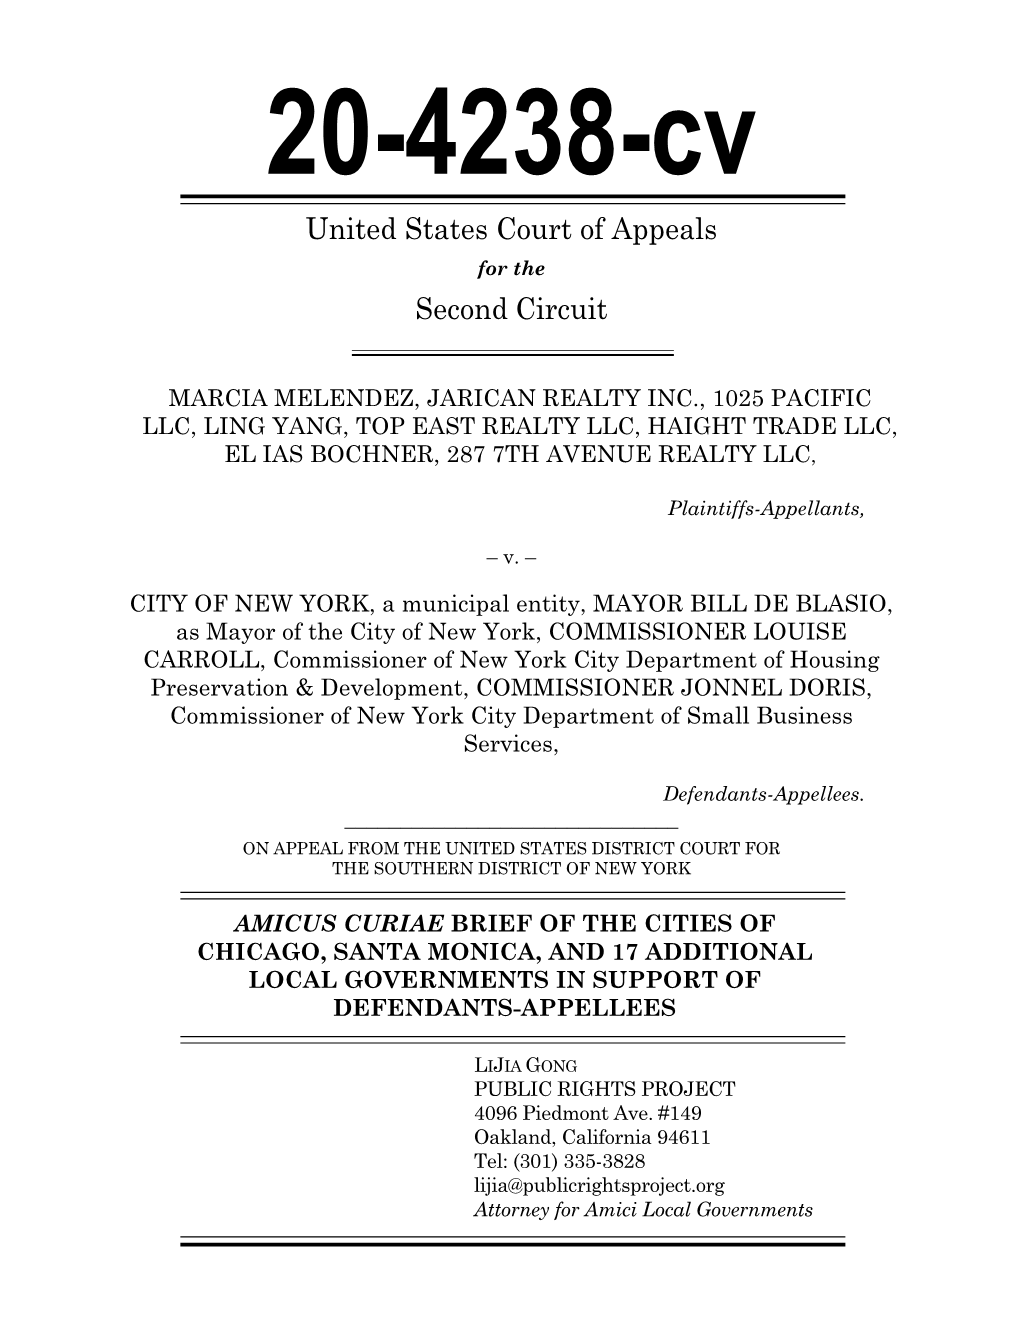 20-4238-Cv United States Court of Appeals for the Second Circuit